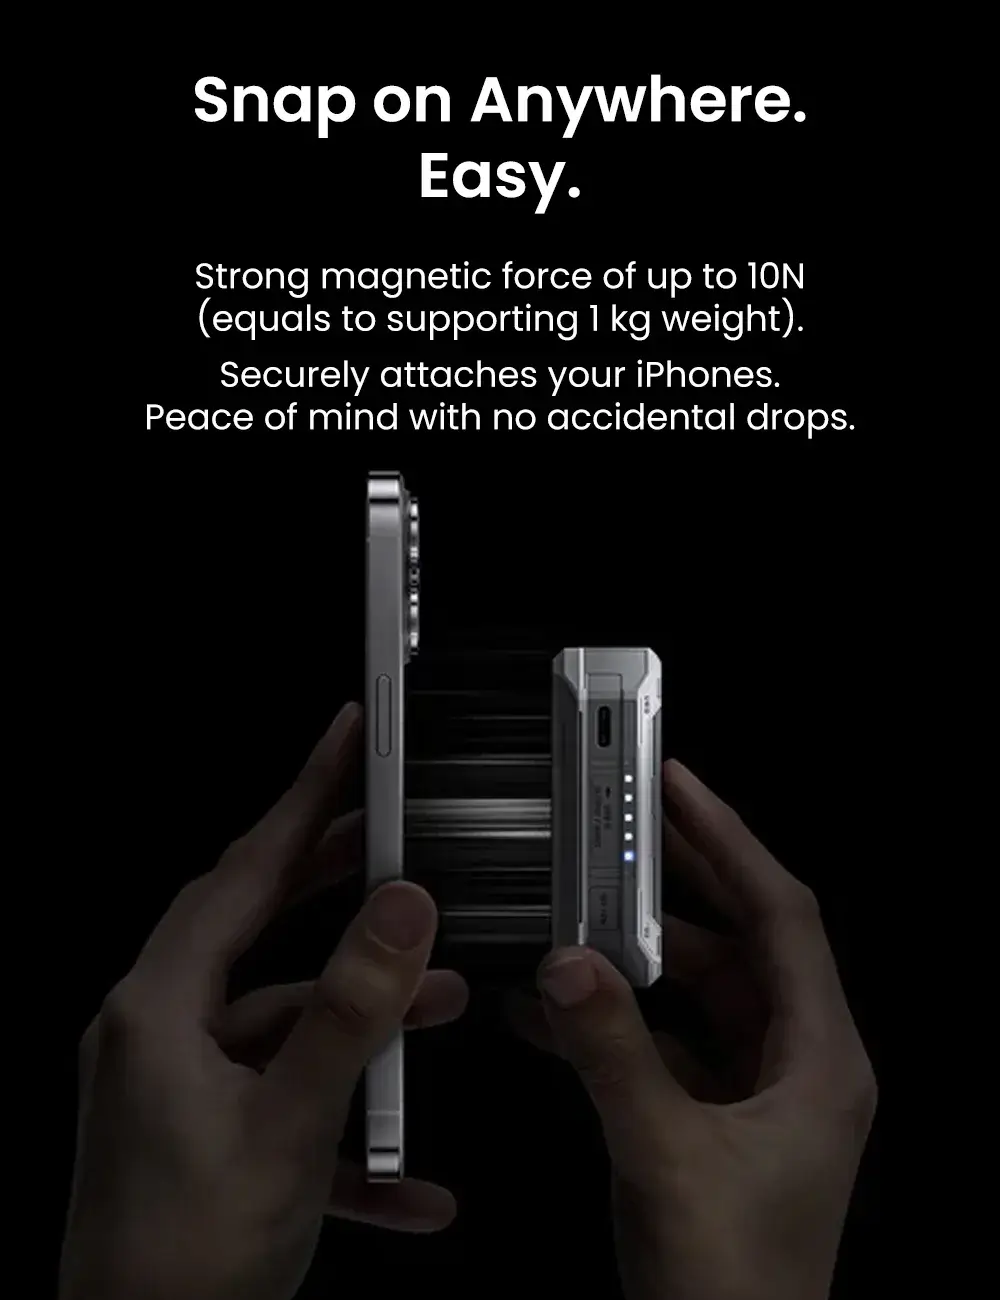 SHARGE Space Elevator Magnetic 5200mAh Power Bank